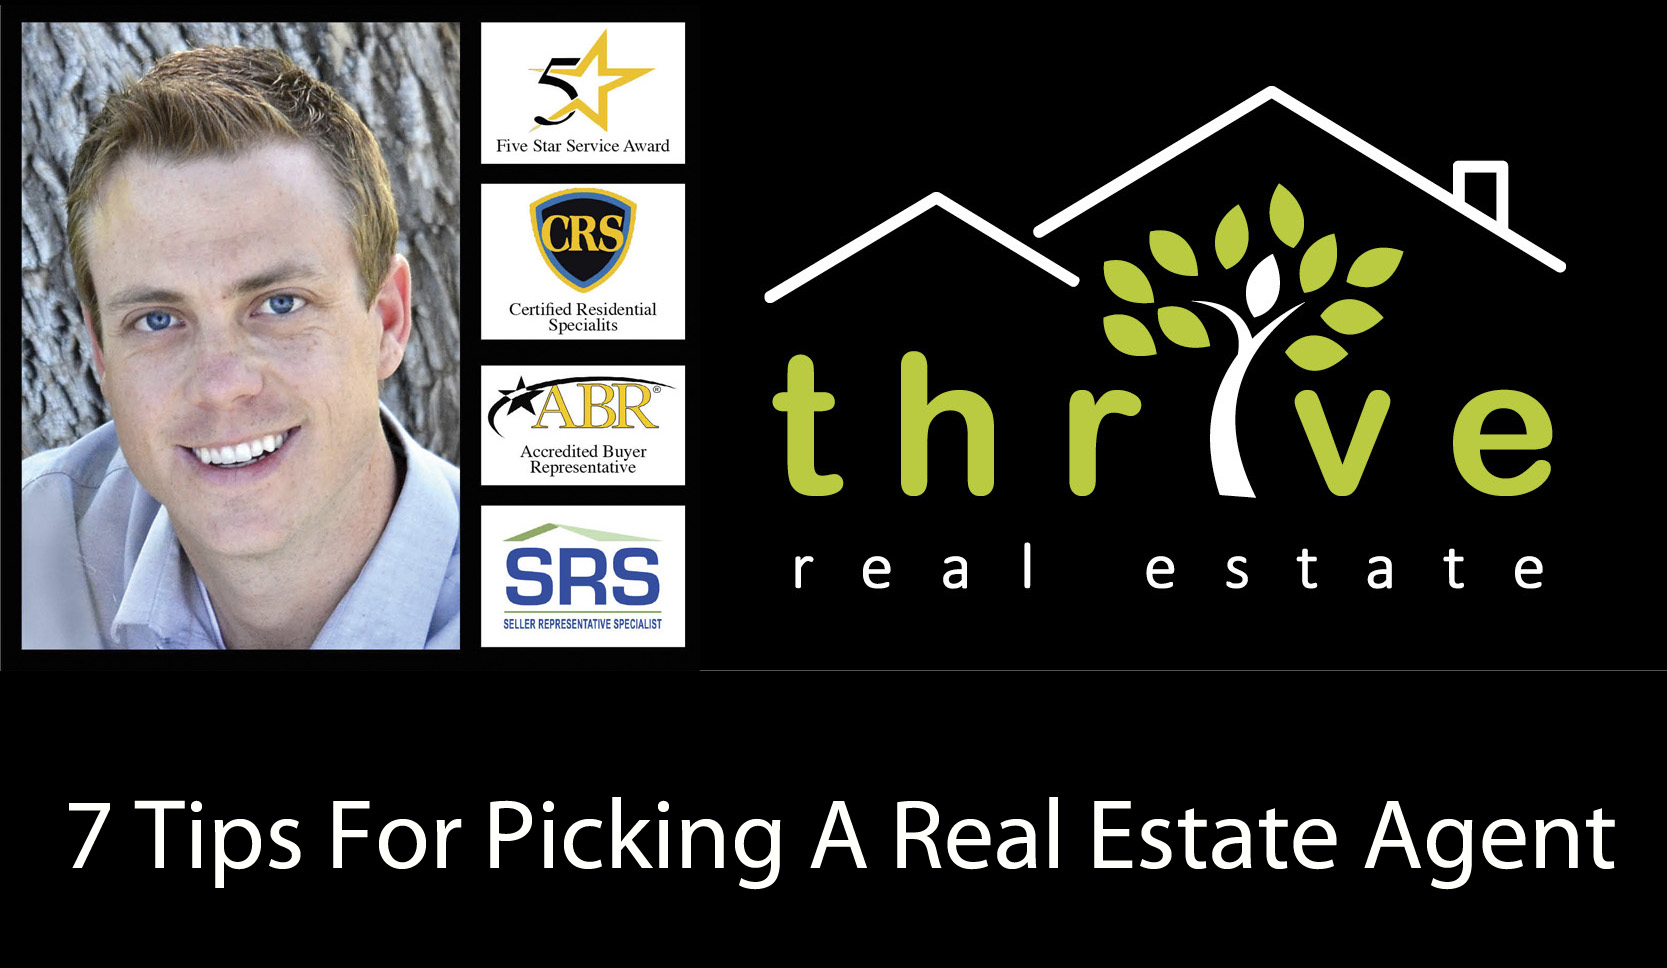 7 Tips for Picking a Real Estate Agent